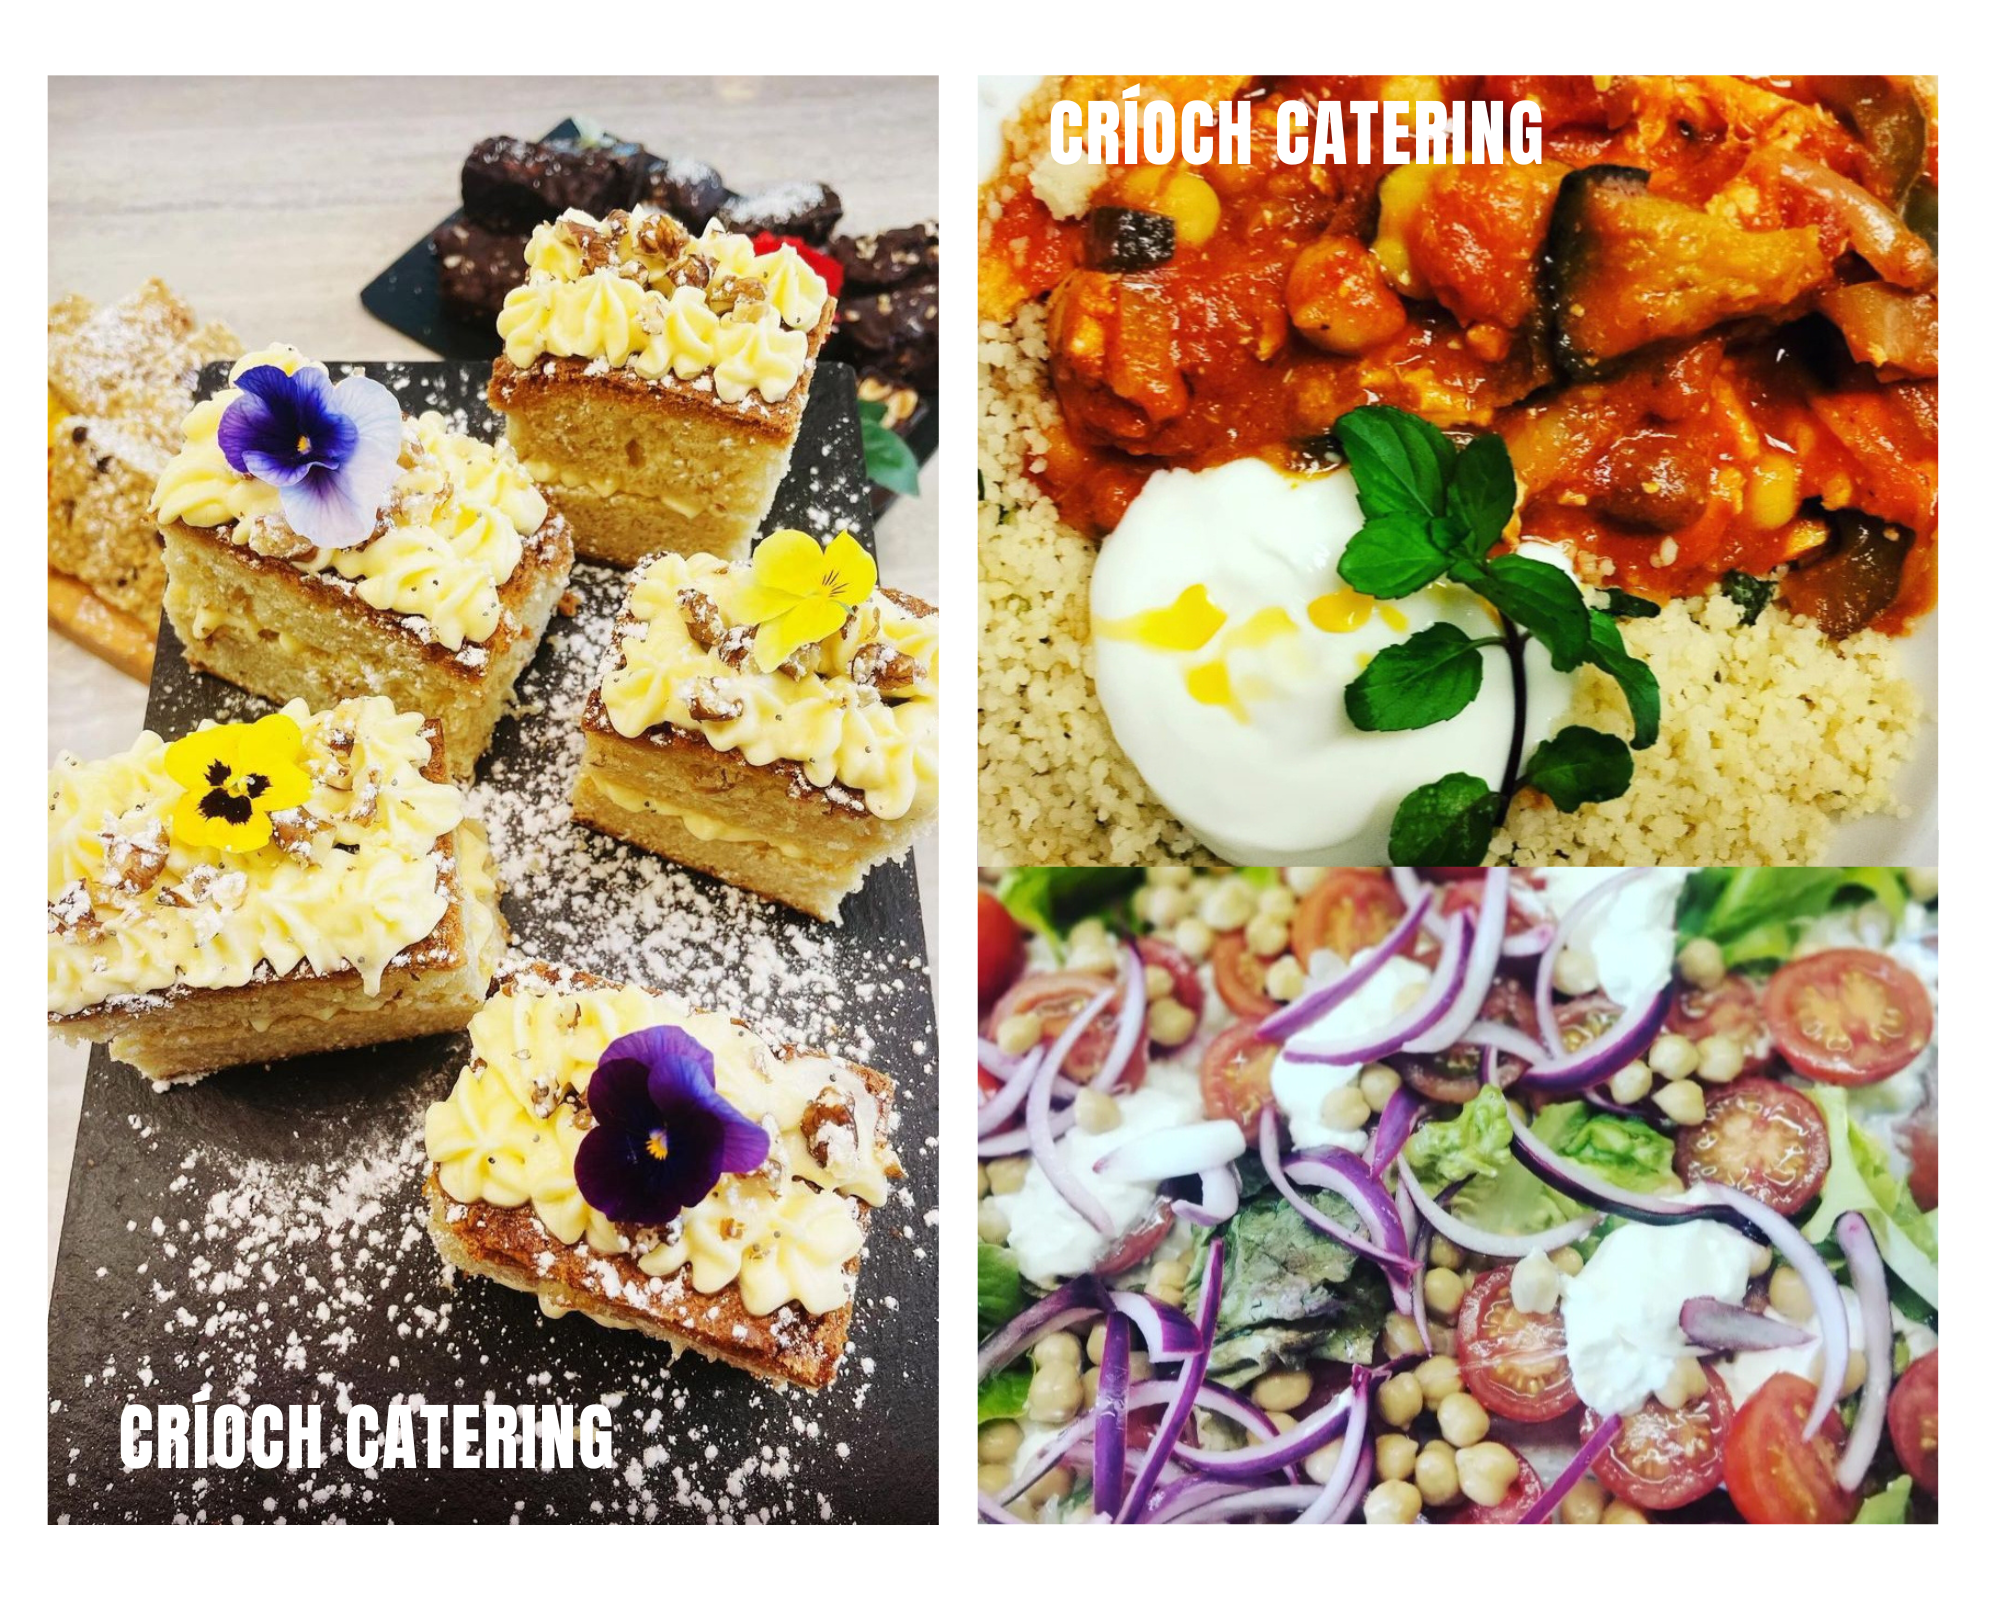 Sweet and Savory Options from Críoch Catering